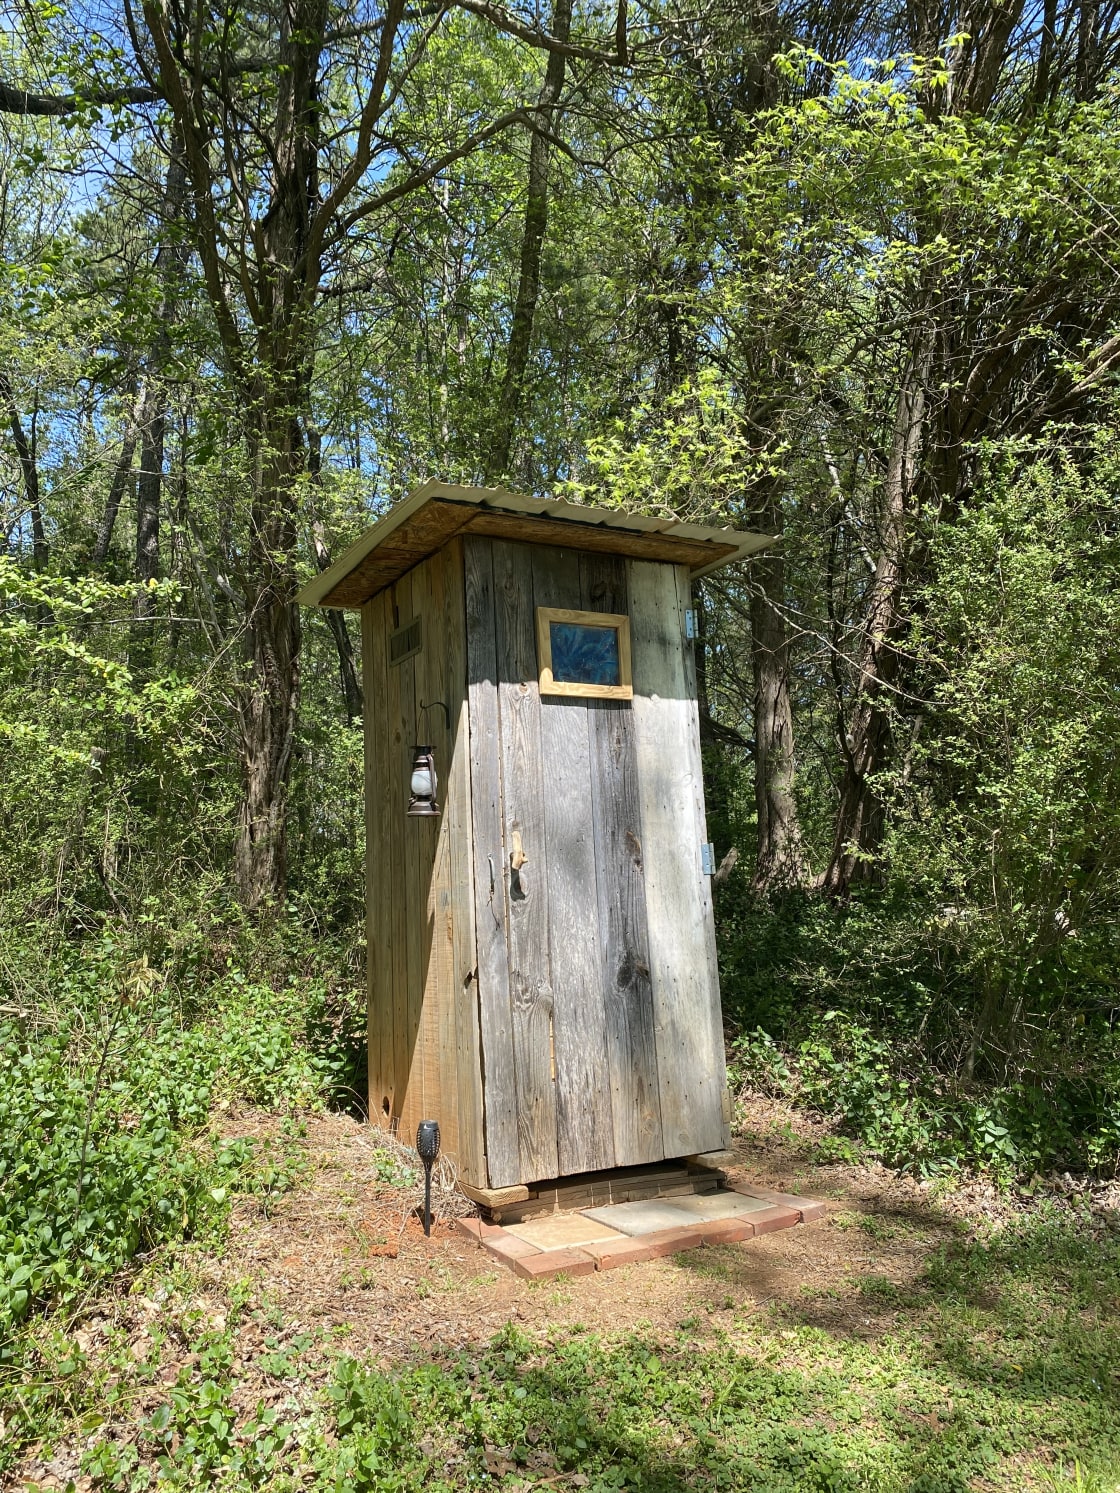 Nearby clean outhouse